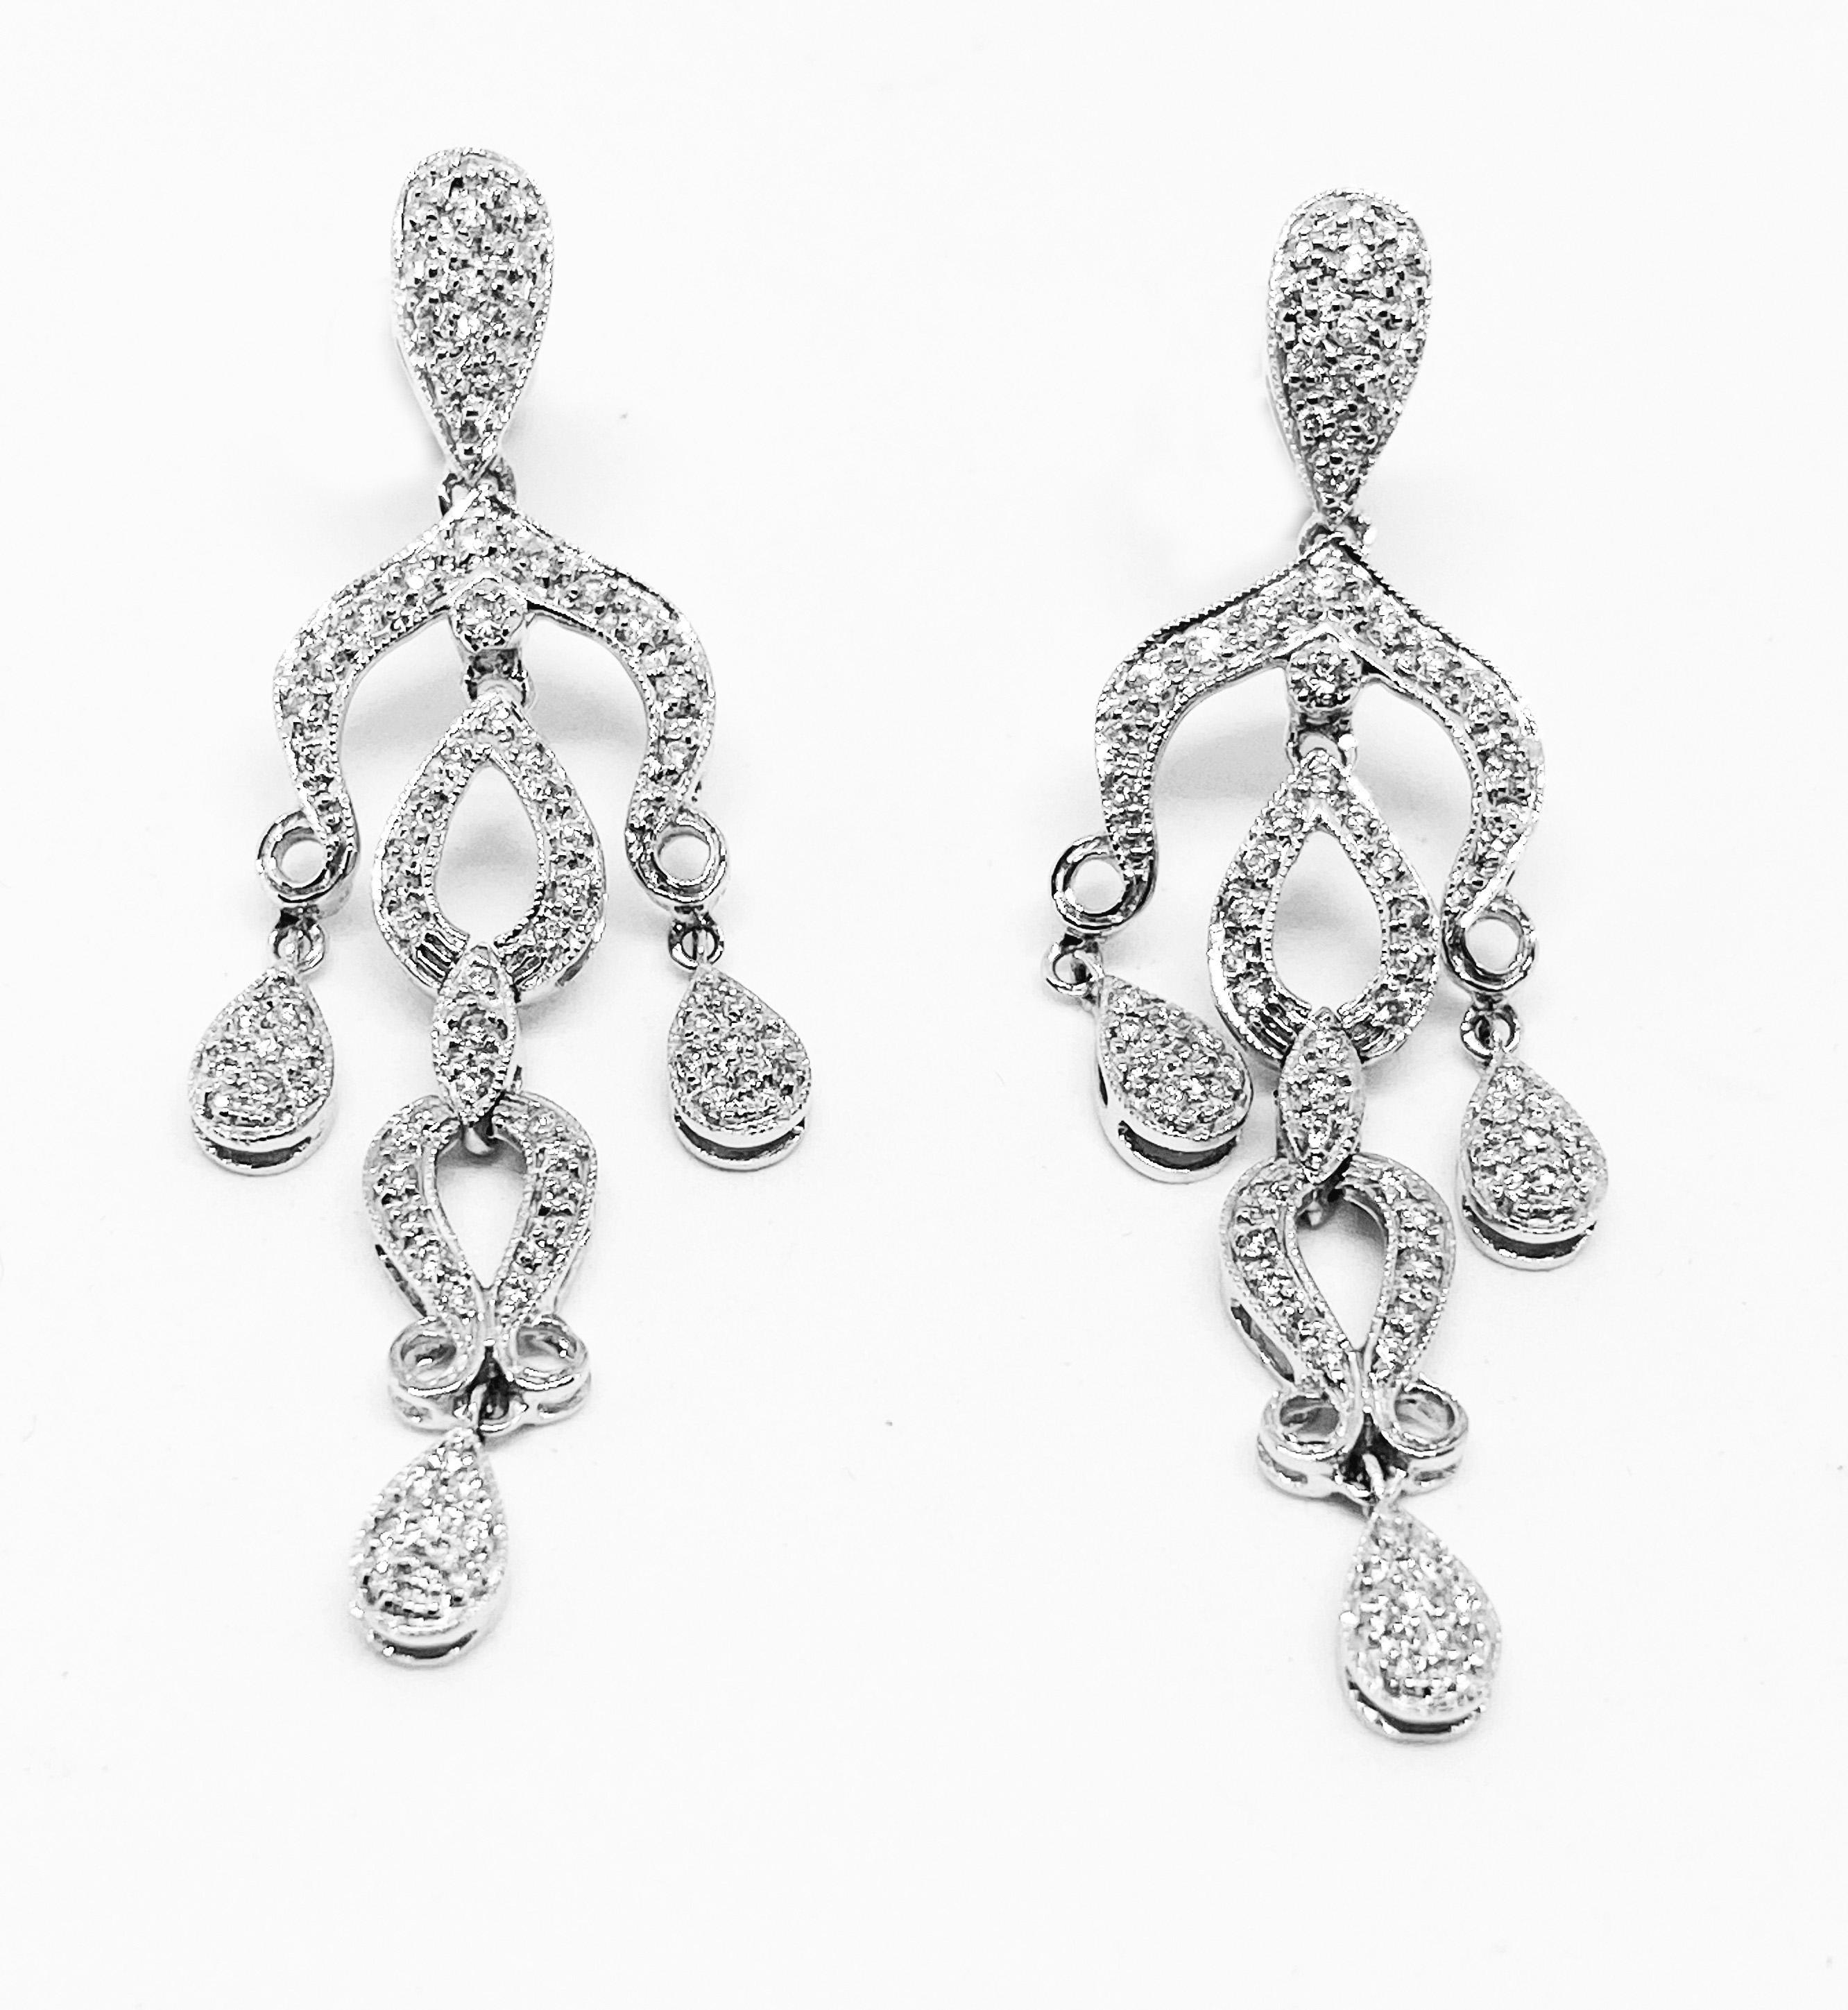 18kt white gold  chandelier earrings 1,00 ct diamonds
HRD Certificates can be issued upon request.  Additional price and delivery will be given prior to client’s purchase
Please note: Each piece will be sent in unopened plastic bag and a number.